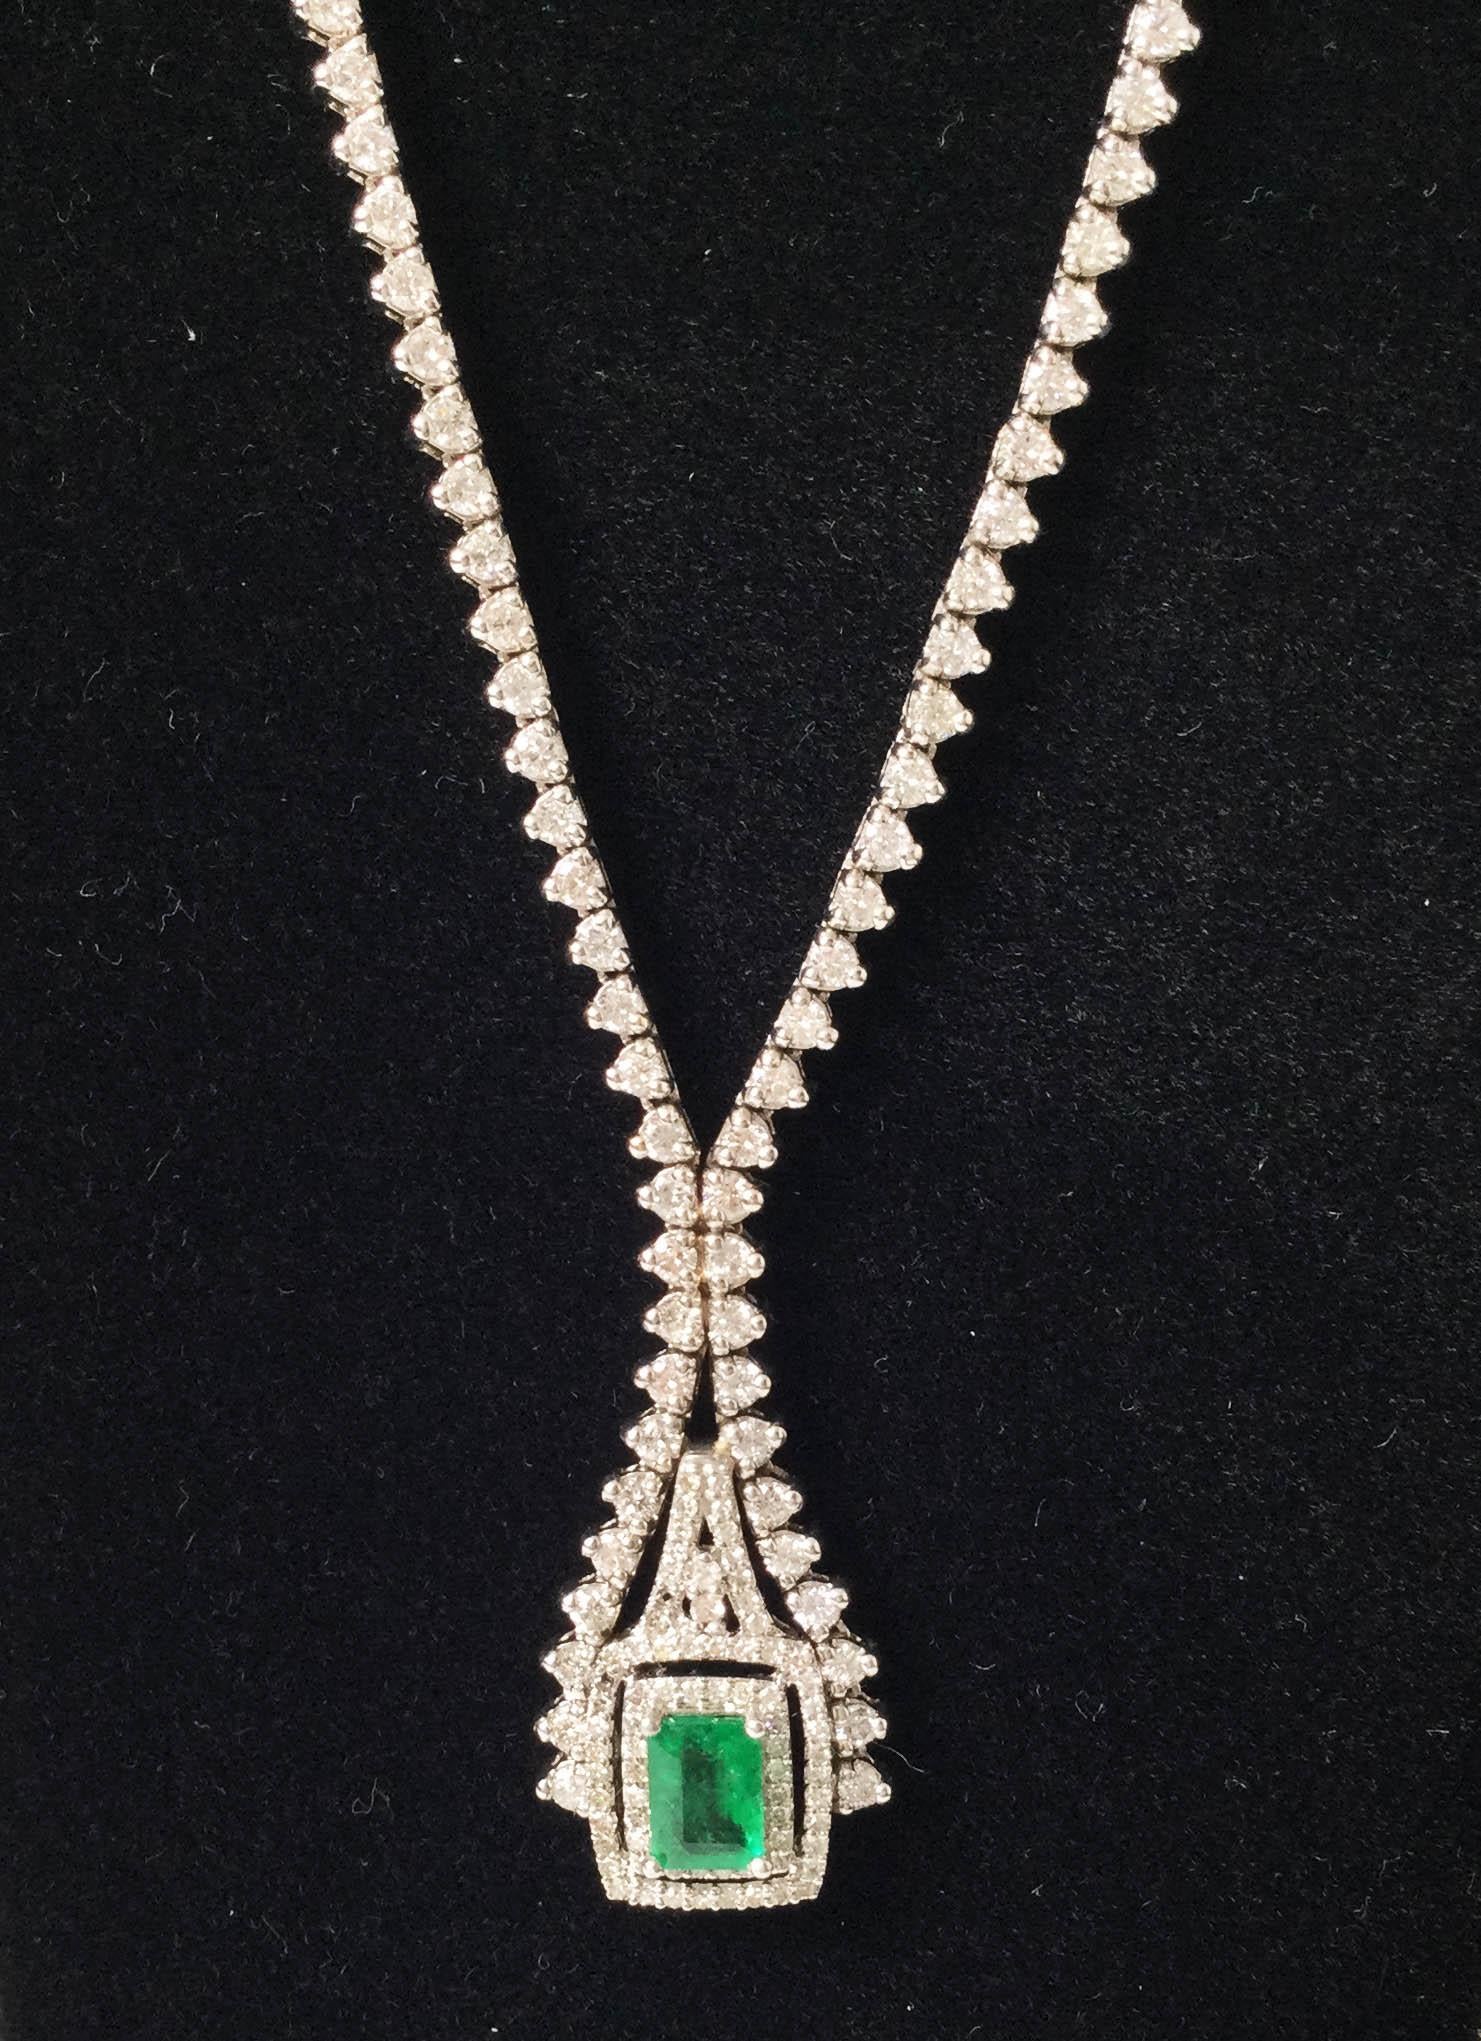 18K White Gold Diamond and Emerald Estate Necklace In Excellent Condition For Sale In Lambertville, NJ